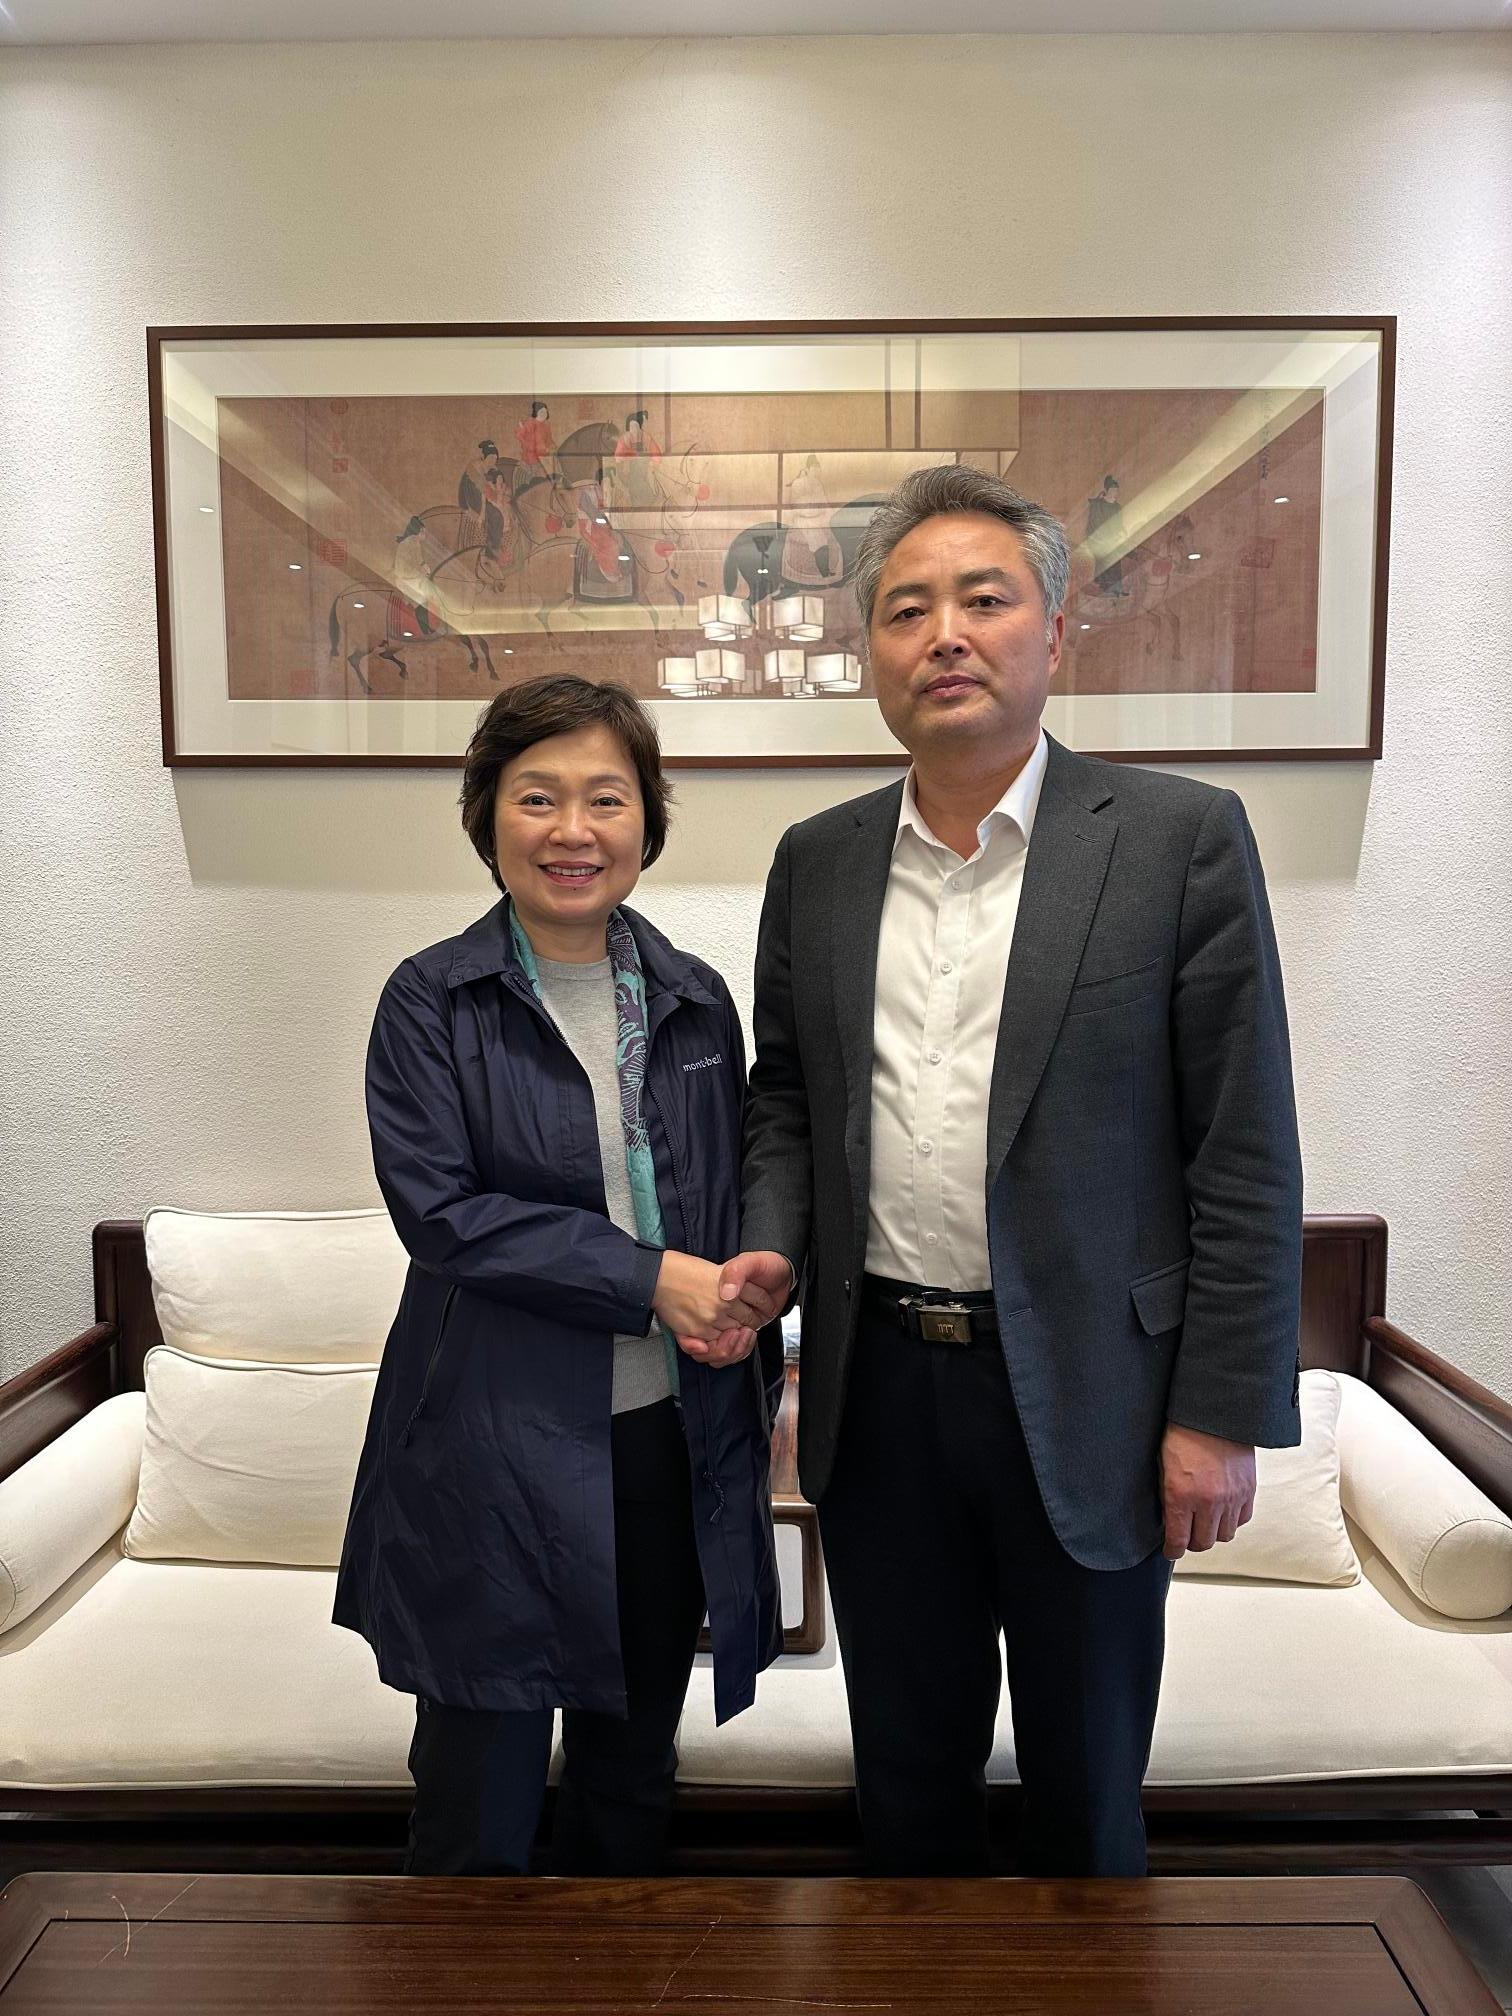 The Secretary for Education, Dr Choi Yuk-lin (left), calls on the Deputy Director-General of the Hong Kong and Macao Affairs Office of the Shaanxi Provincial People's Government, Mr Yao Jinchuan (right), in Xi'an today (October 10).